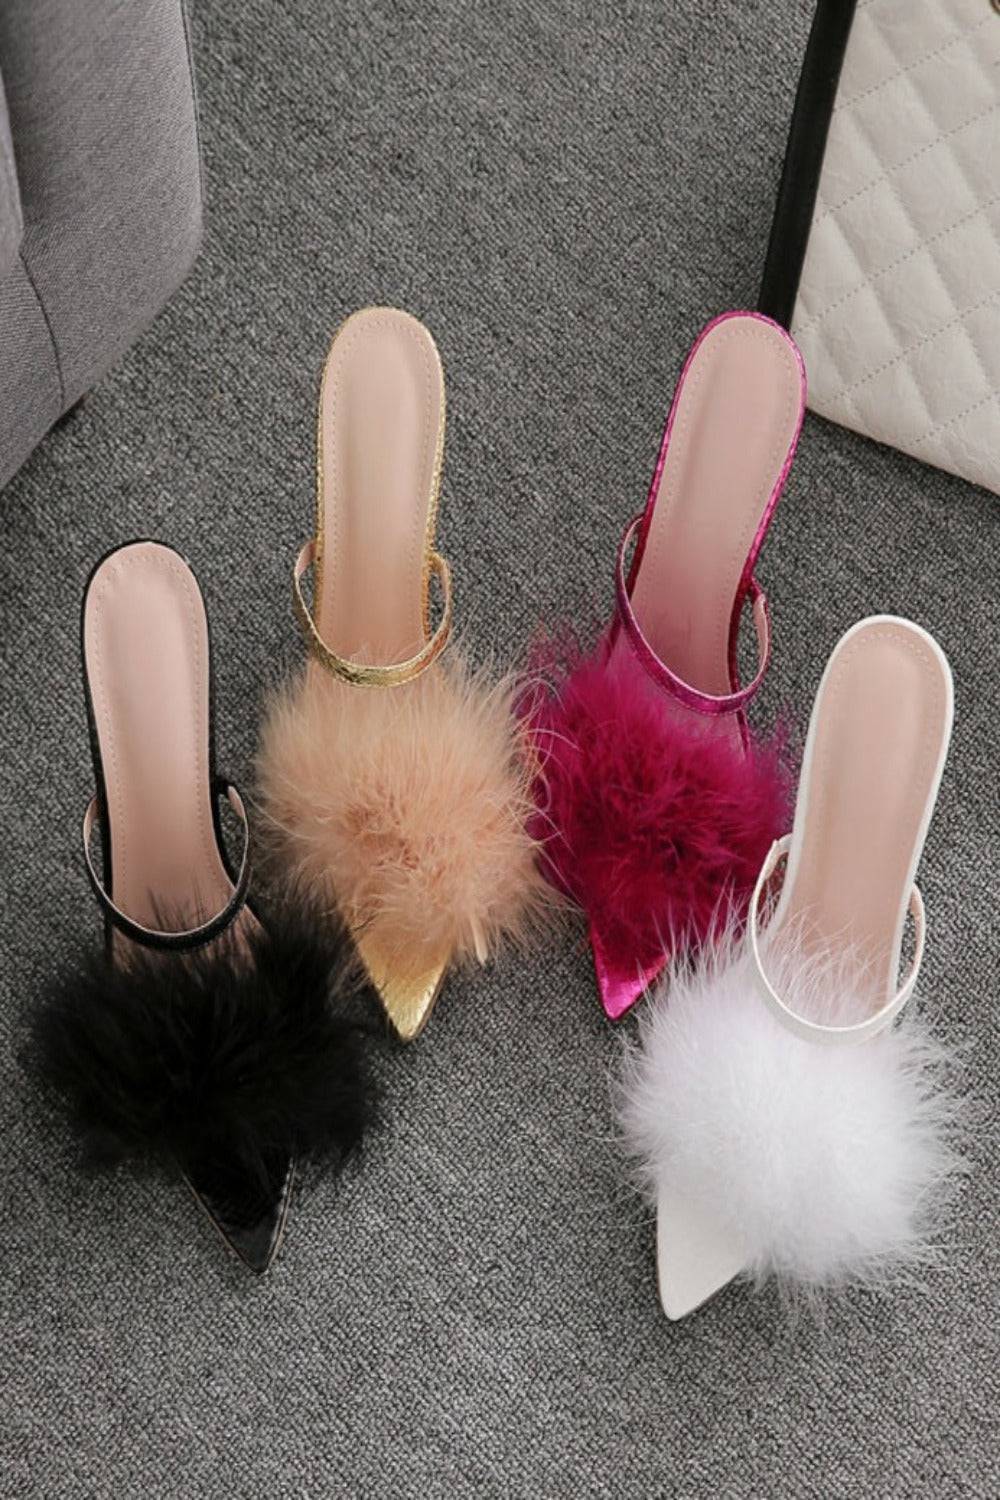 Black Back Furry Fur Sexy High Heels Stiletto Sandals Shoes